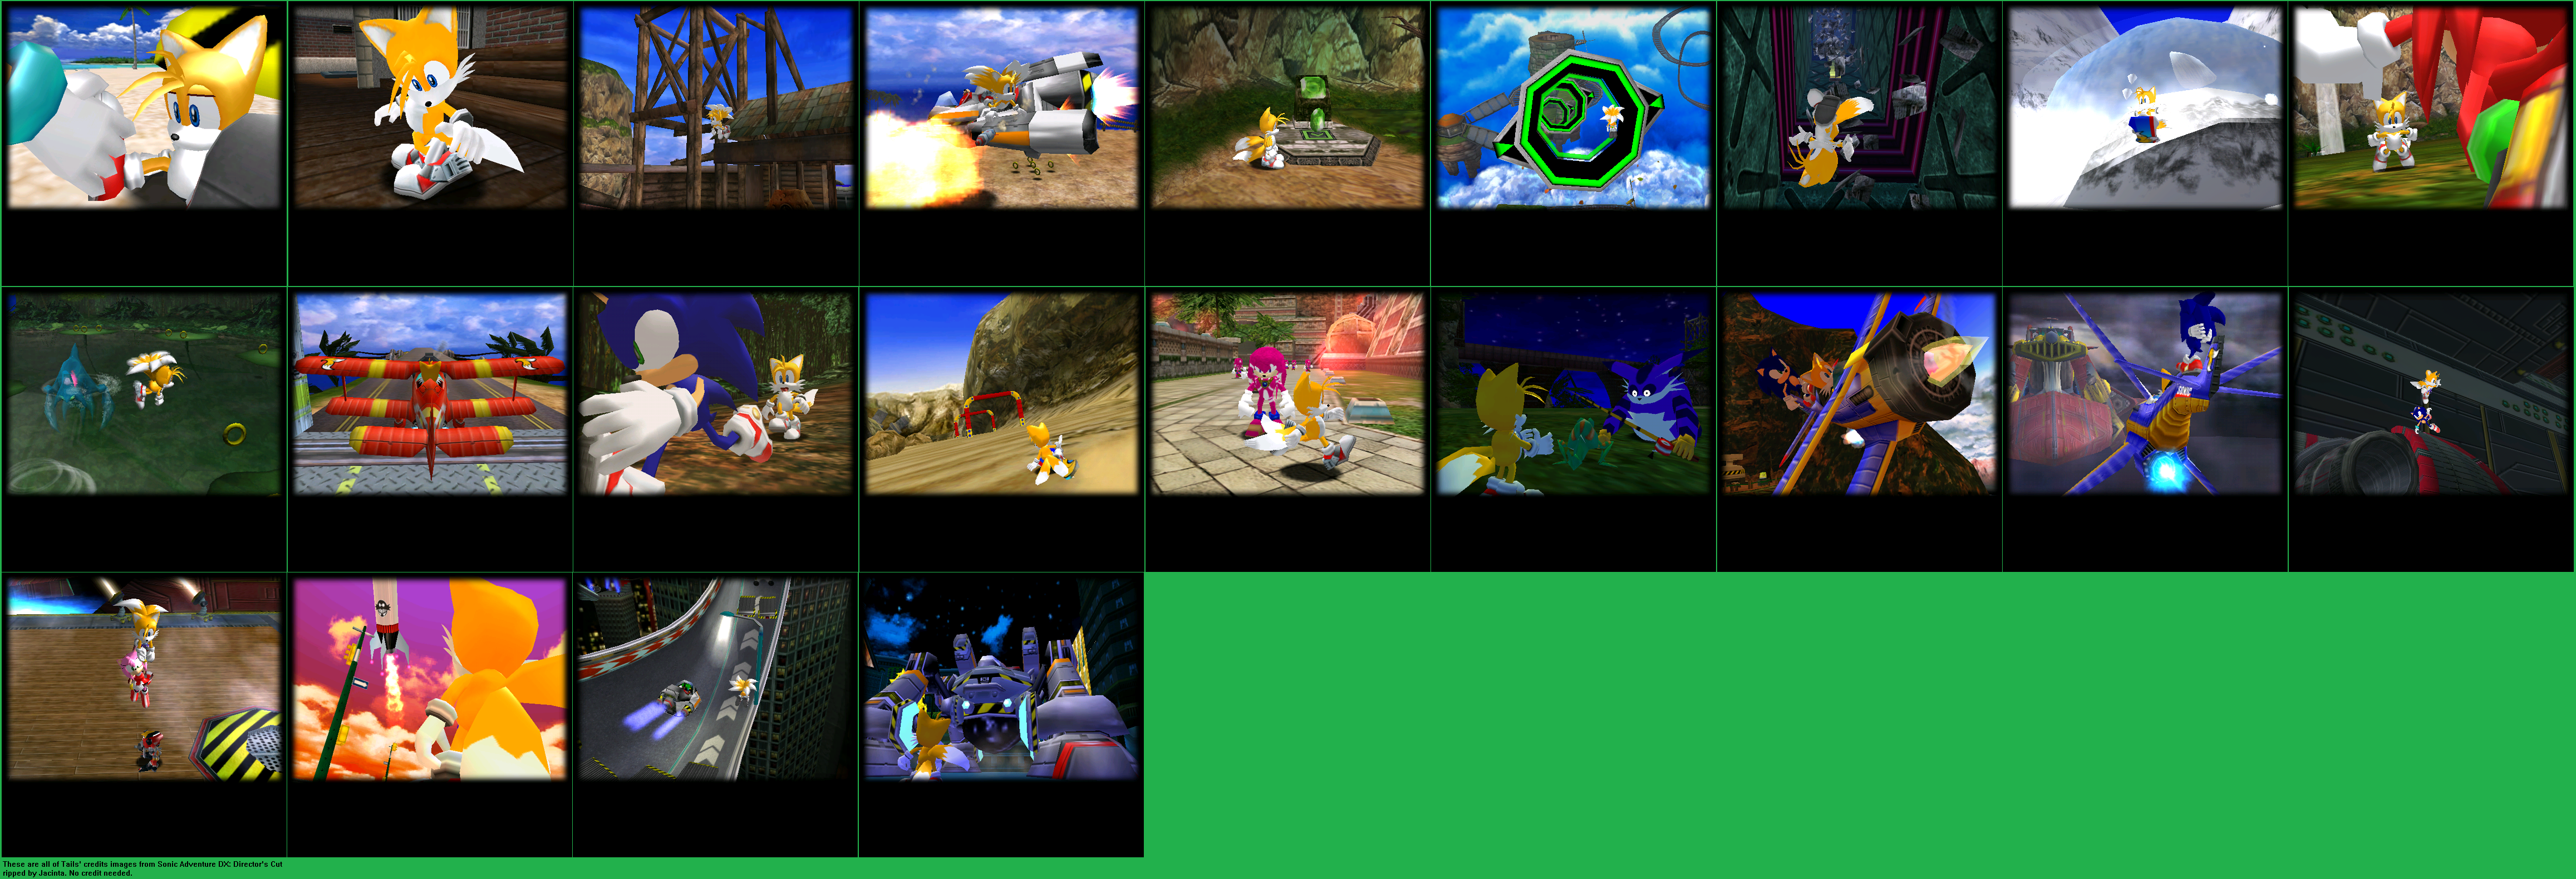 Sonic Adventure DX: Director's Cut - Credits Images (Tails)